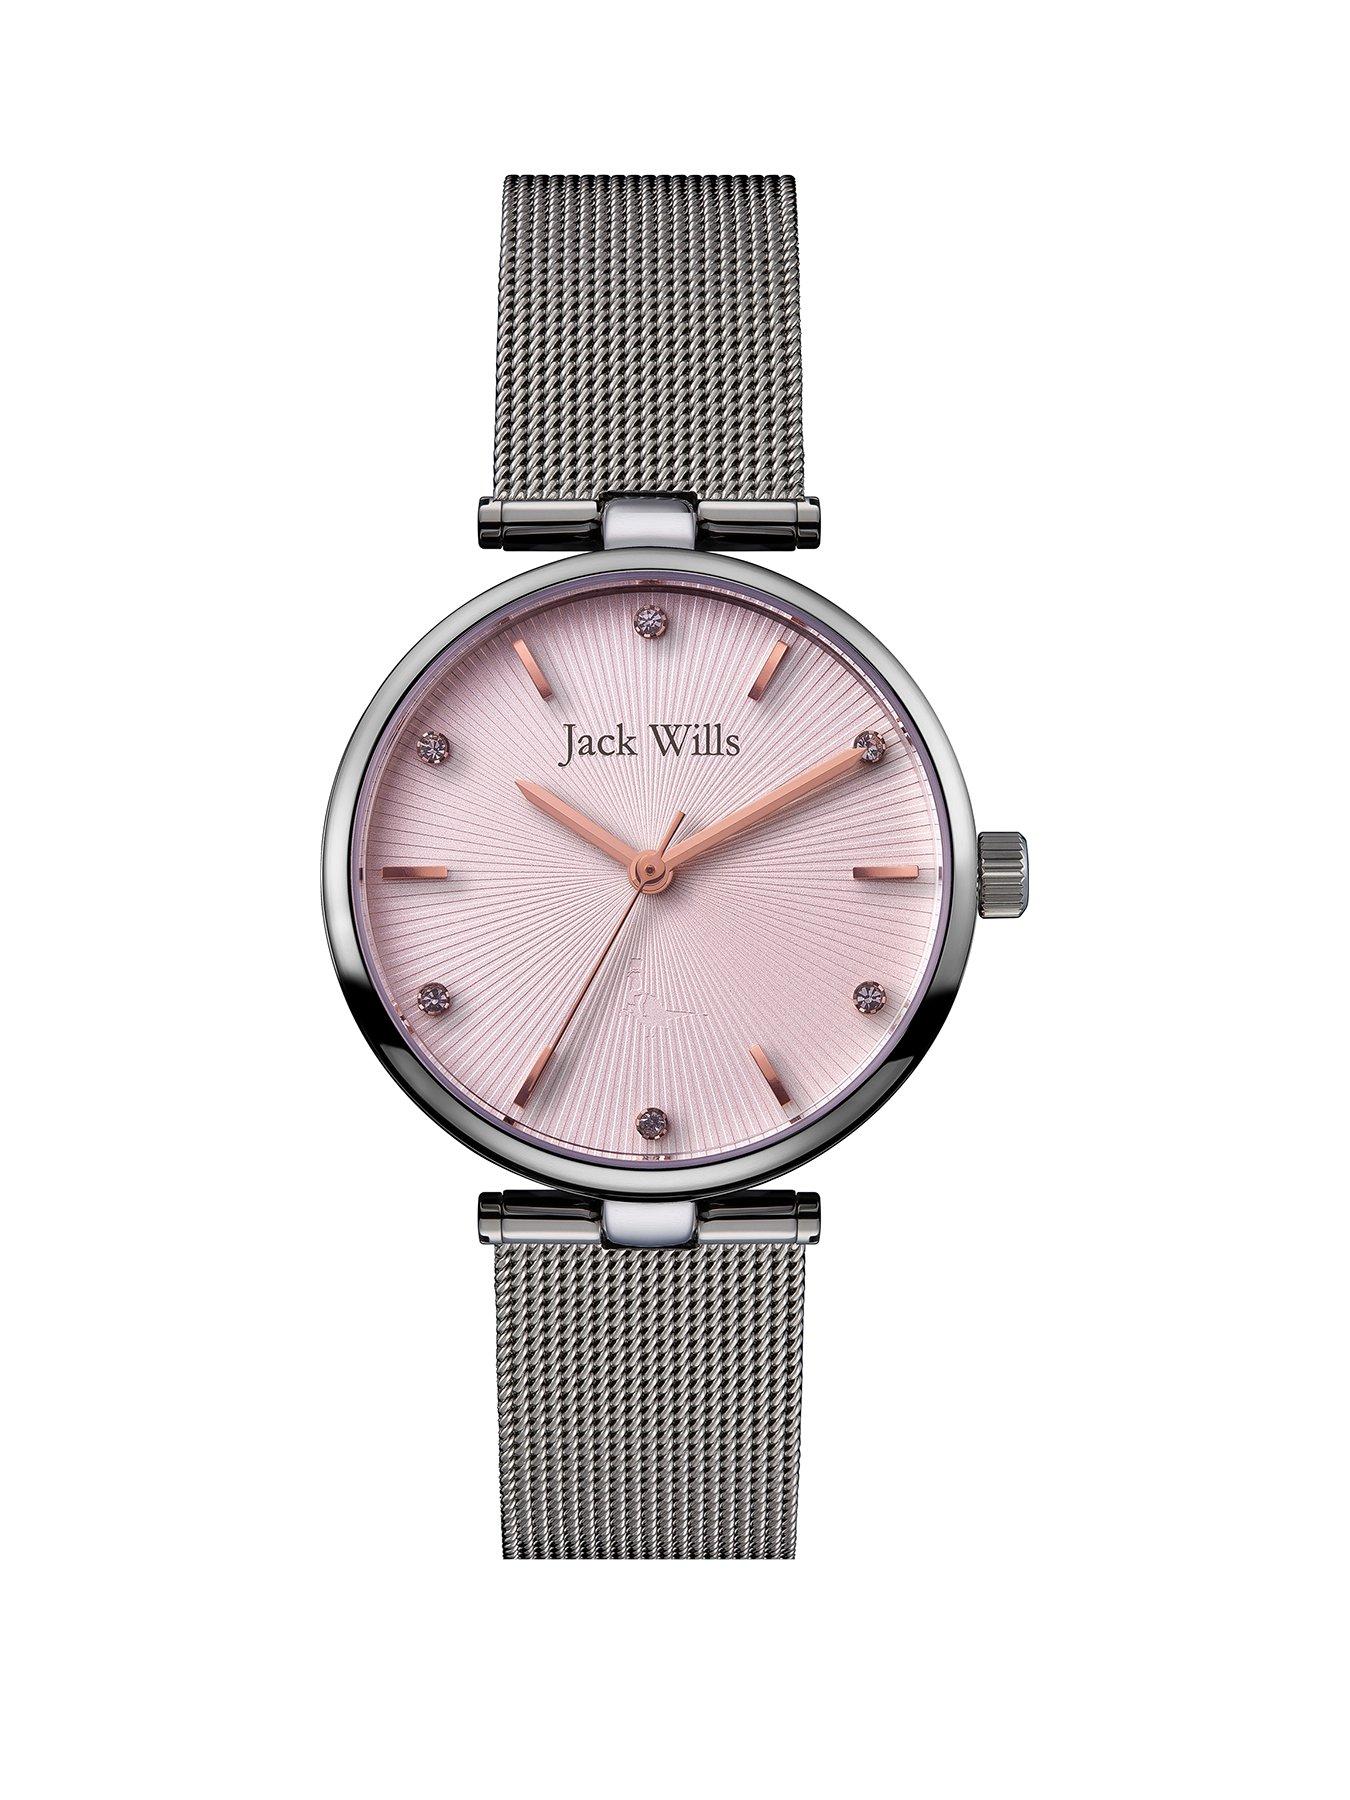 Jack Wills Jack Wills Pink Fan Textured Rose Gold Detail And